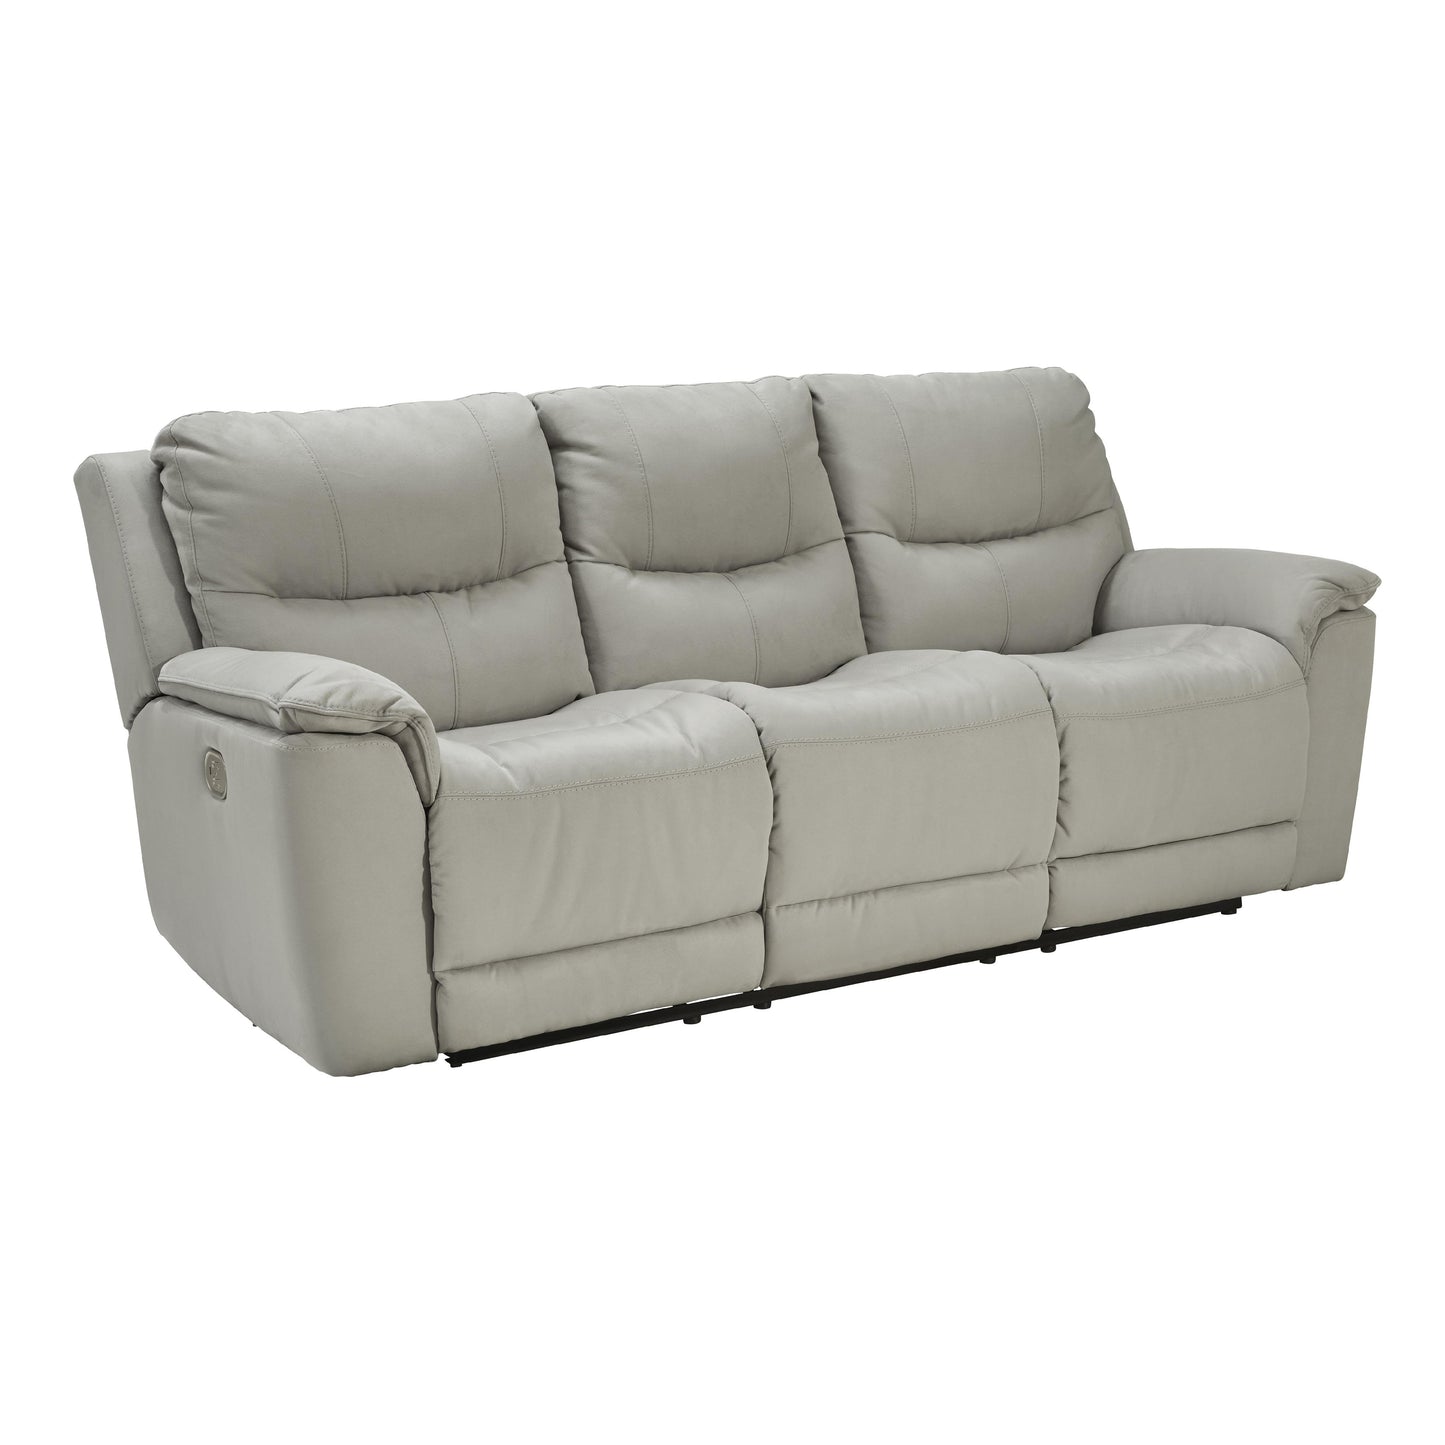 Signature Design by Ashley Next-Gen Gaucho Power Reclining Leather Look Sofa 6080615 IMAGE 1